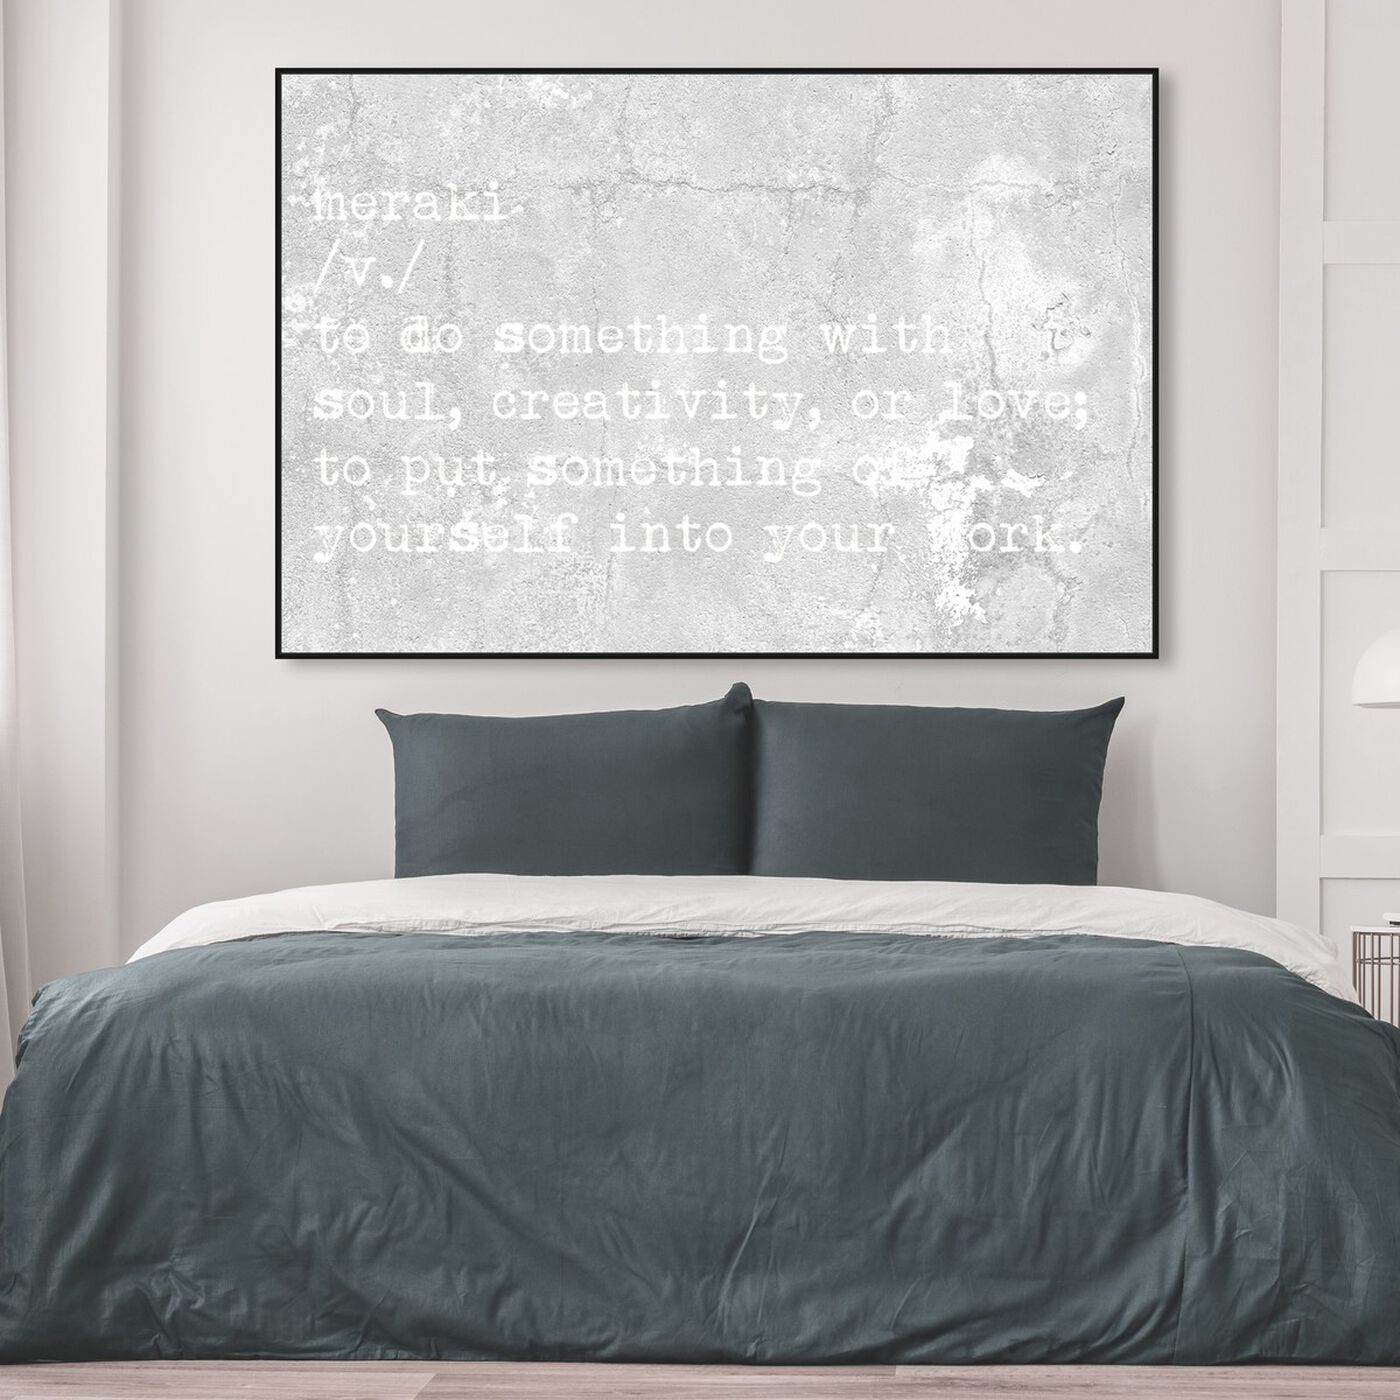 Hanging view of Meraki featuring typography and quotes and motivational quotes and sayings art.